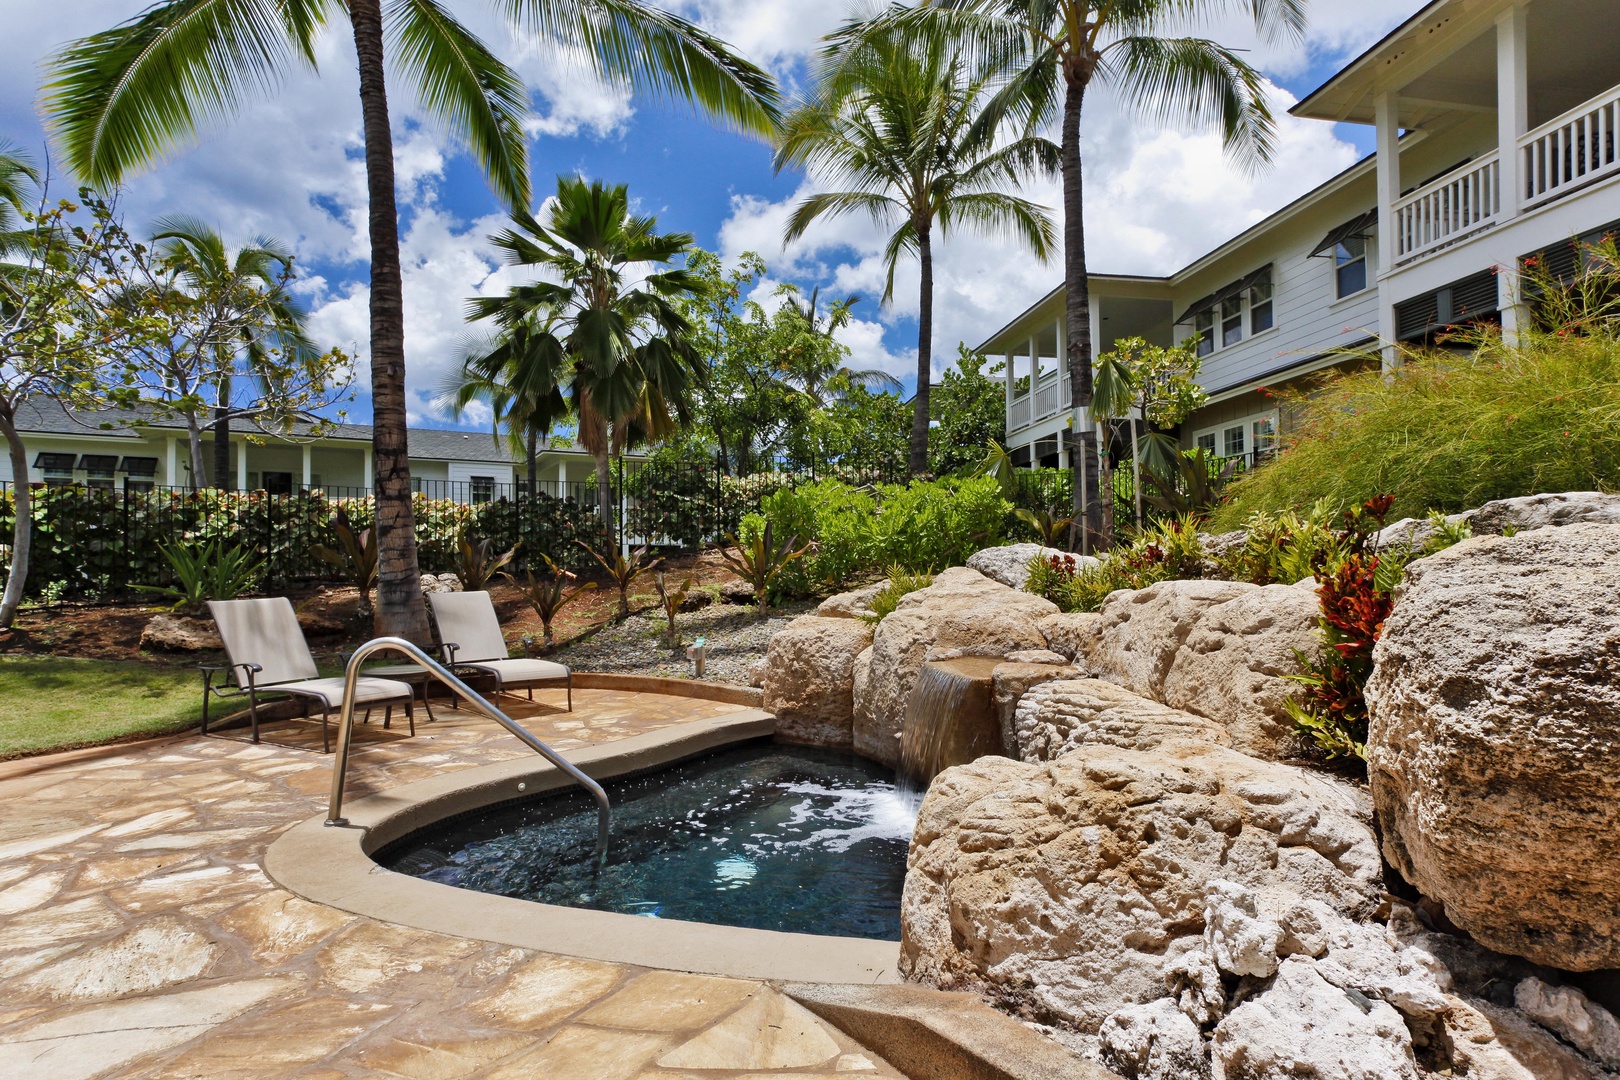 Kapolei Vacation Rentals, Coconut Plantation 1194-3 - Relax and unwind in the "Hidden Spa" at Coconut Plantation.